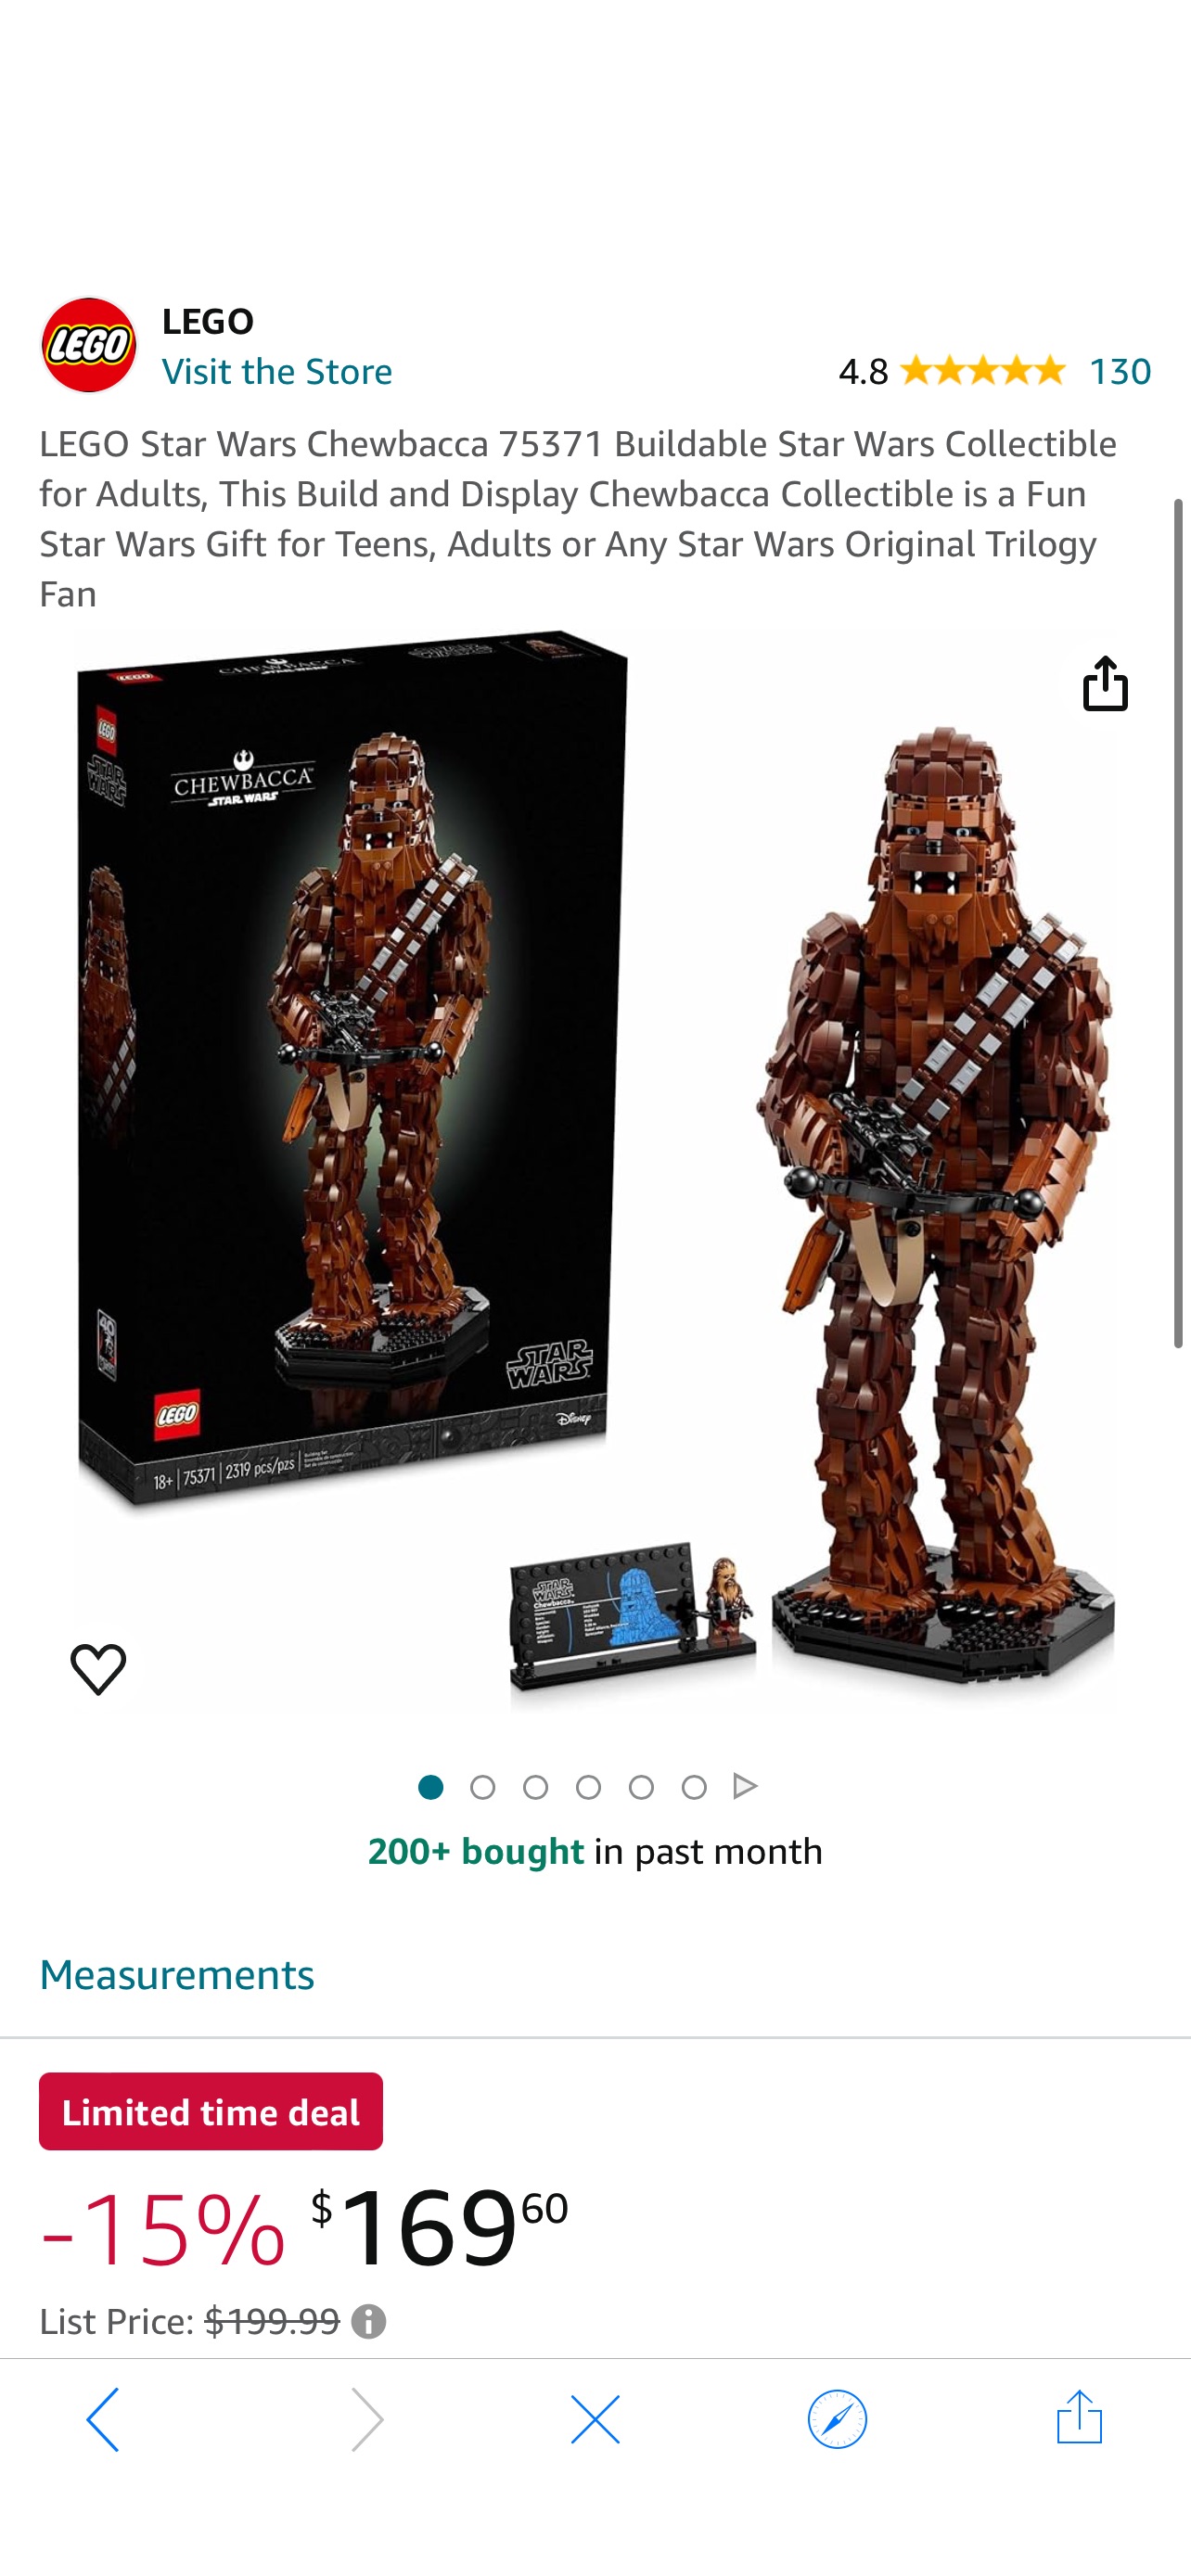 Amazon.com: LEGO Star Wars Chewbacca 75371 Buildable Star Wars Collectible for Adults, This Build and Display Chewbacca Collectible is a Fun Star Wars Gift for Teens, Adults or Any Star Wars Original 